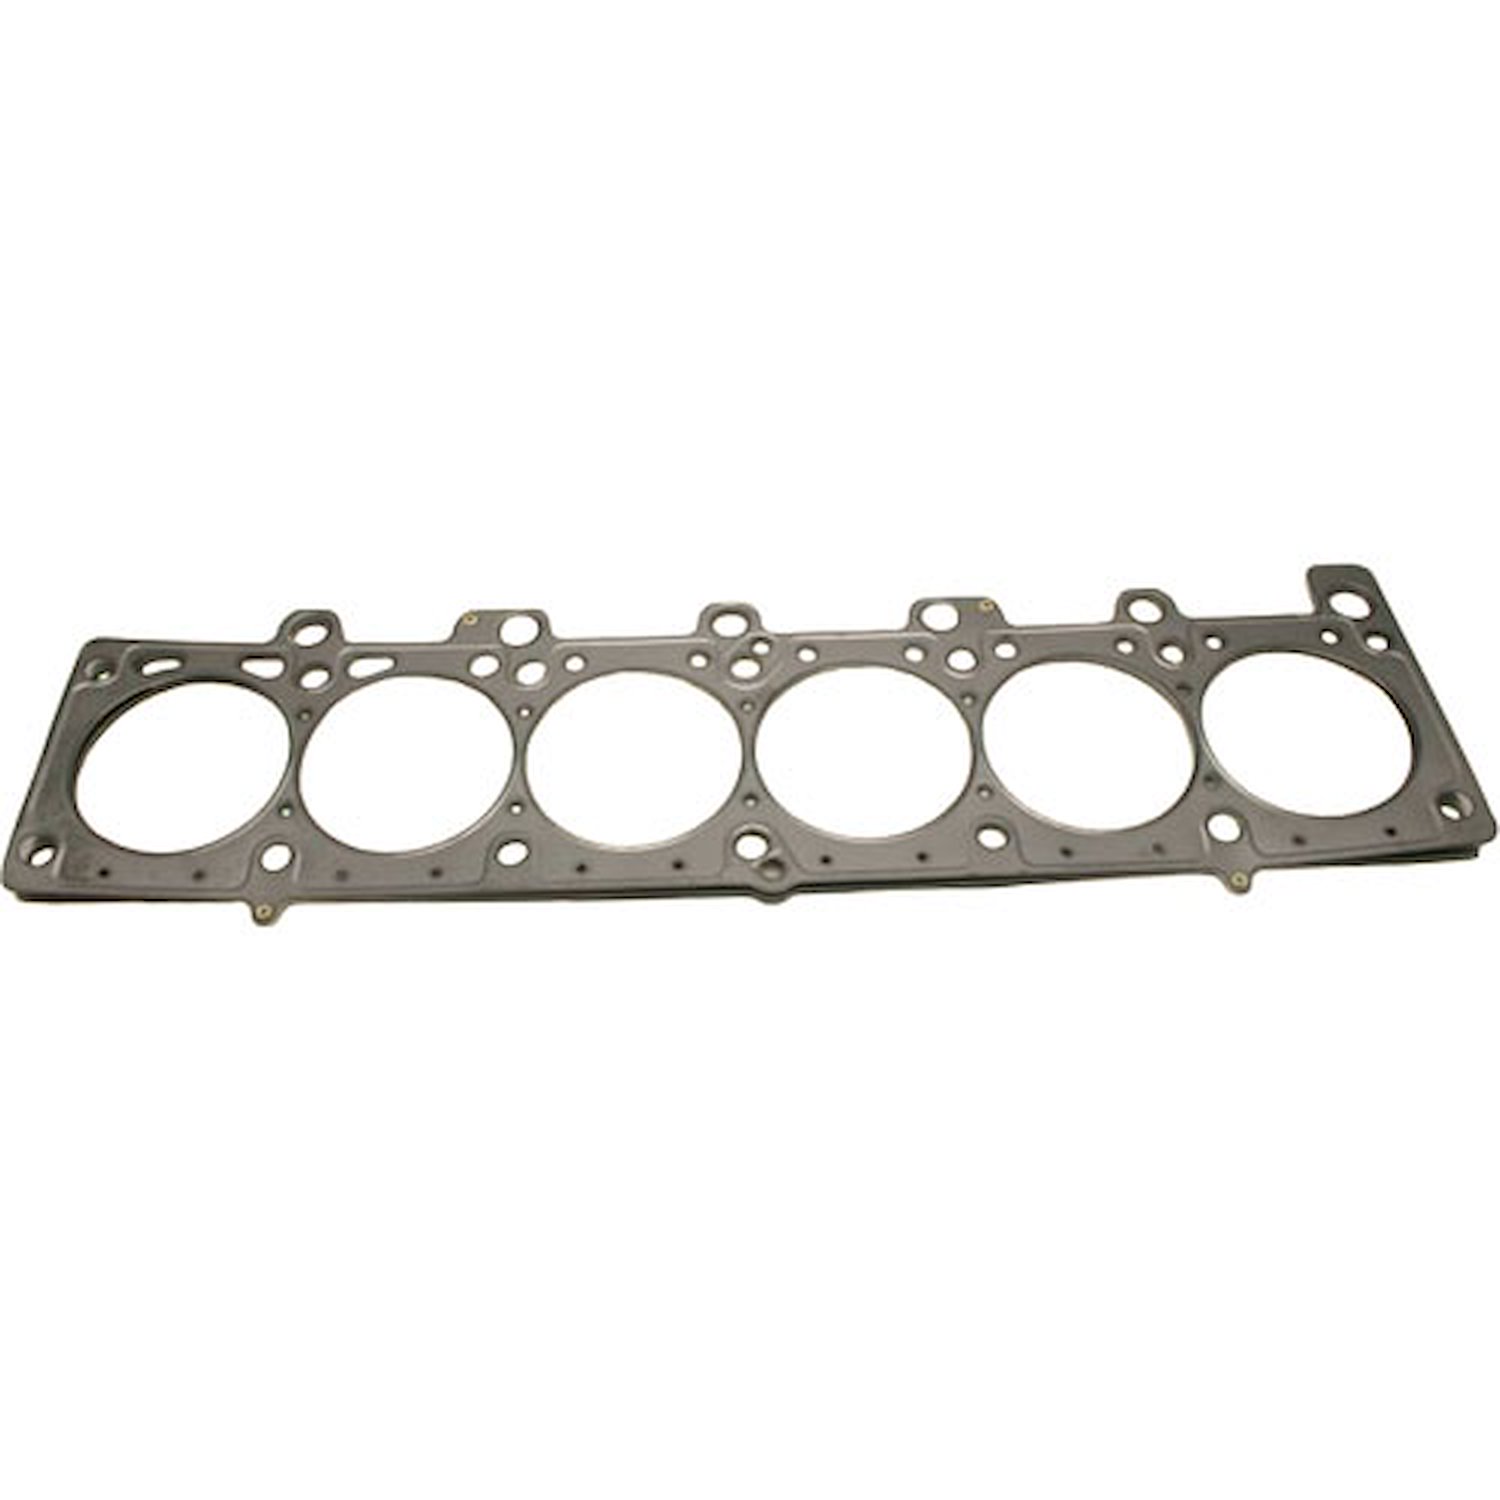 Cylinder Head Gasket for Select 1982-1993 BMW Models with M20B25/M20B27 Engines